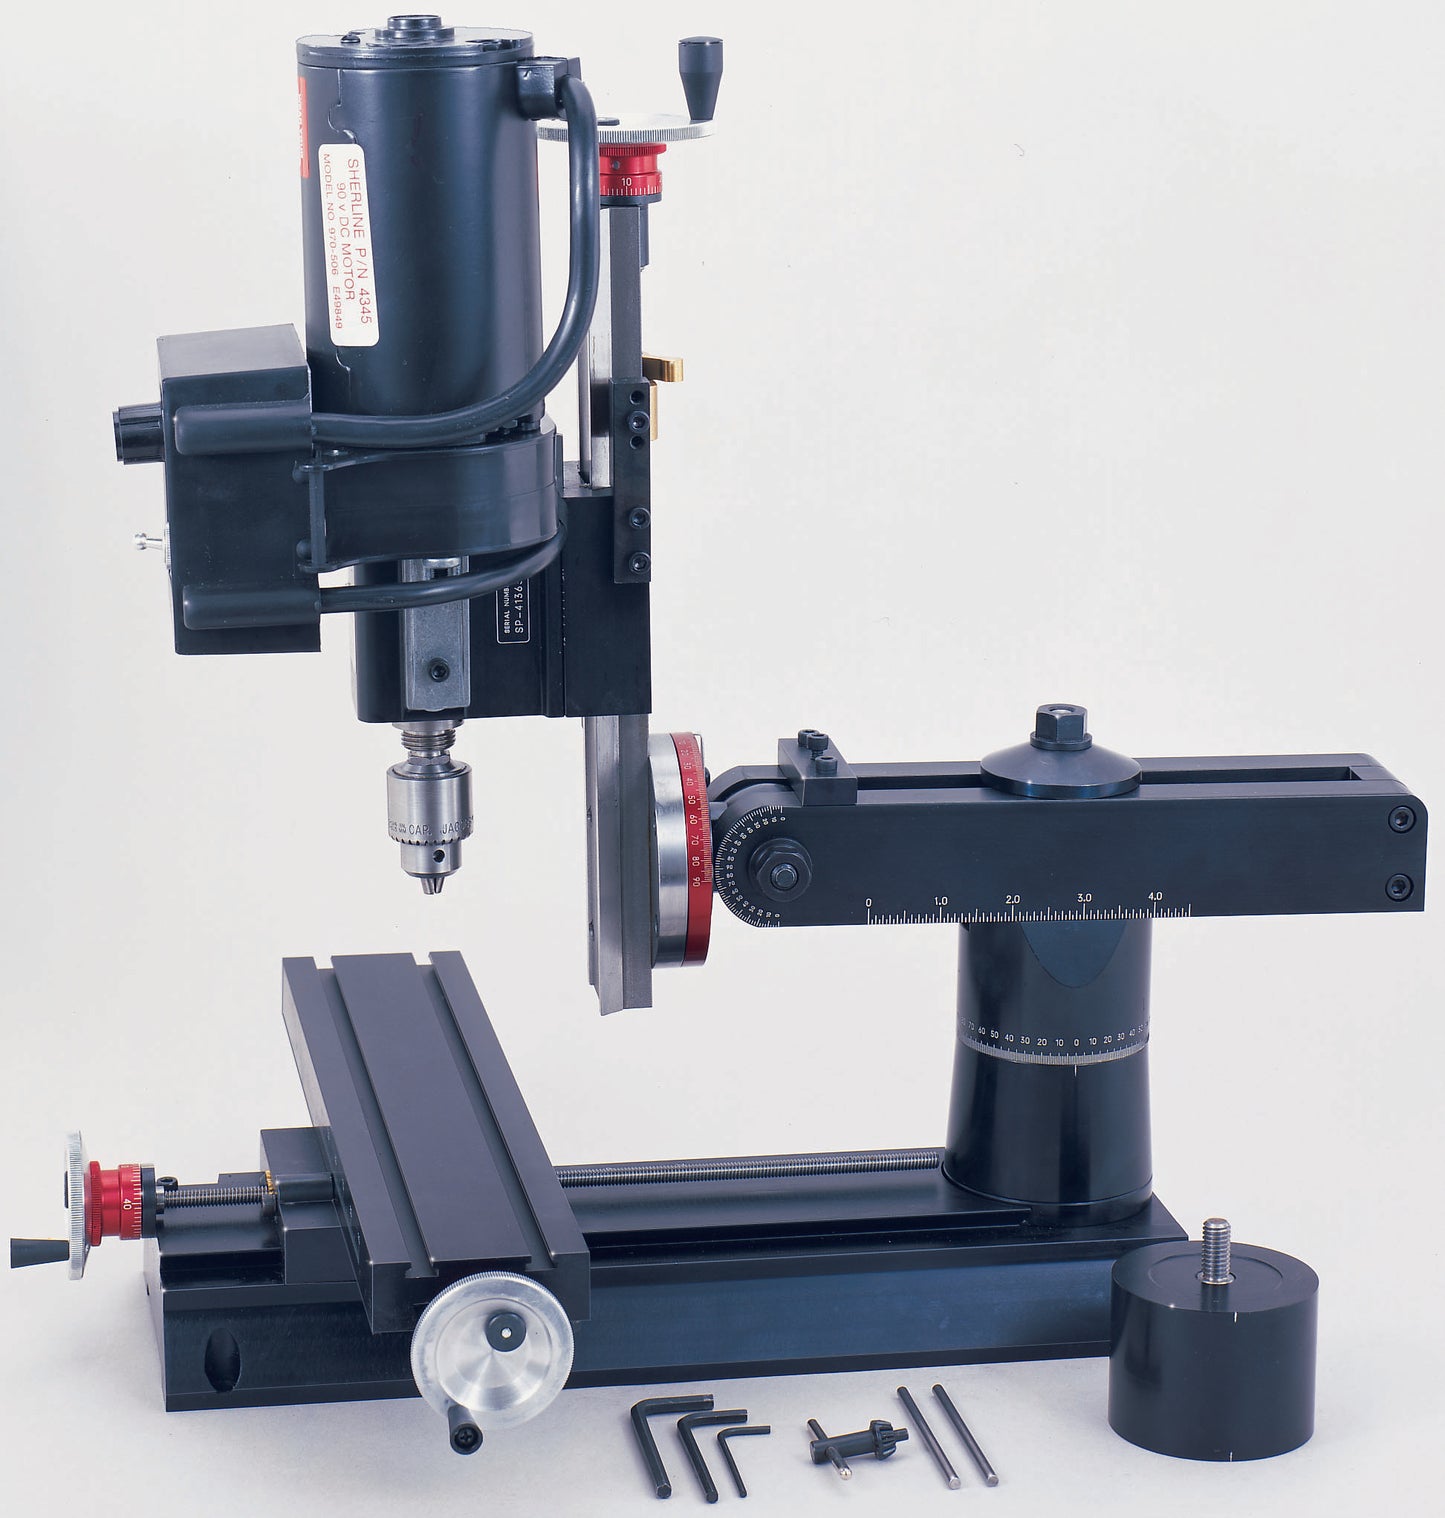 UNIMILL Deluxe, 8-axis milling machine